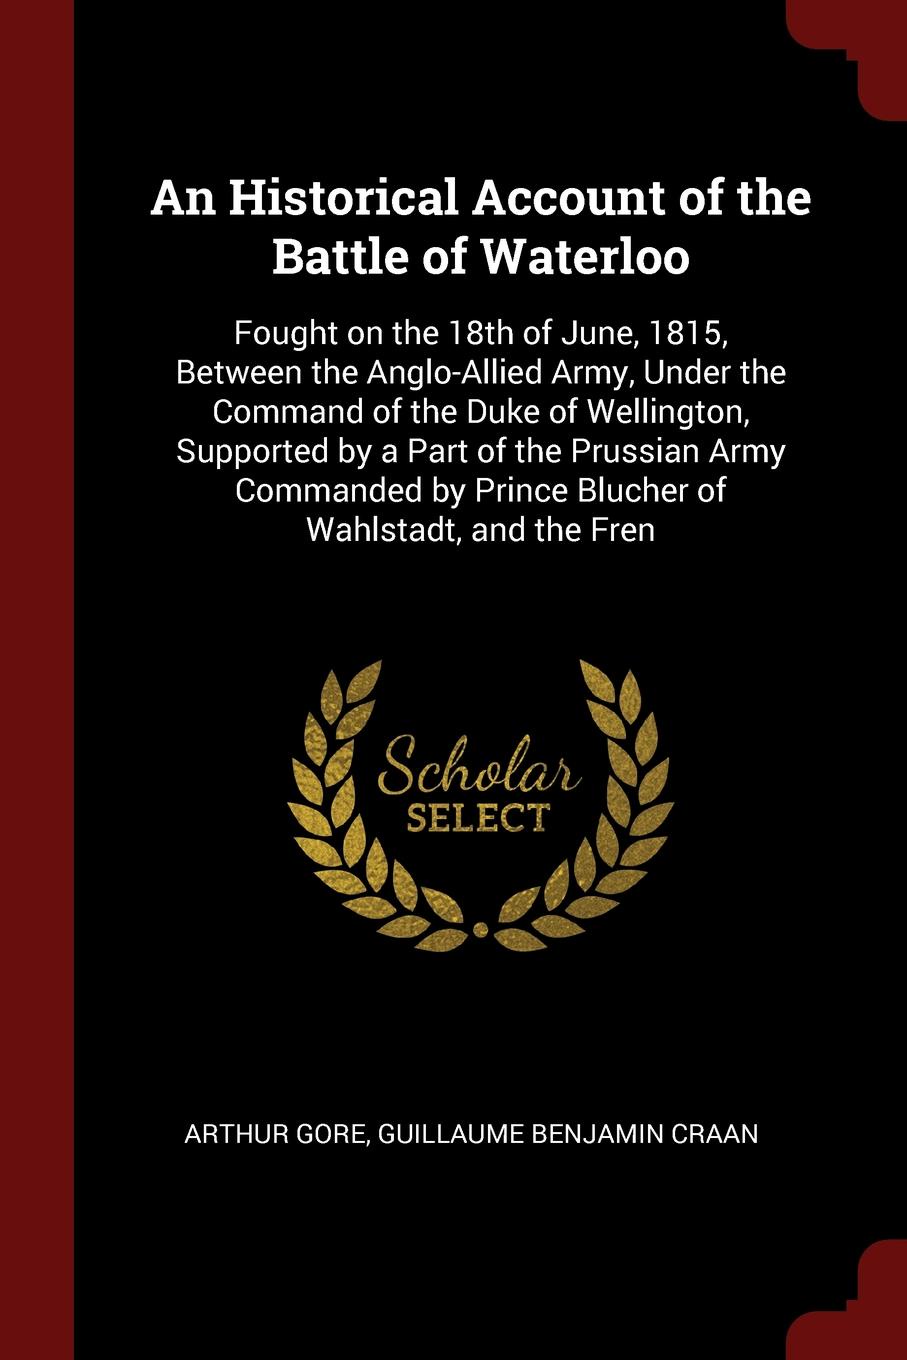 An Historical Account of the Battle of Waterloo. Fought on the 18th of June, 1815, Between the Anglo-Allied Army, Under the Command of the Duke of Wellington, Supported by a Part of the Prussian Army Commanded by Prince Blucher of Wahlstadt, and t...